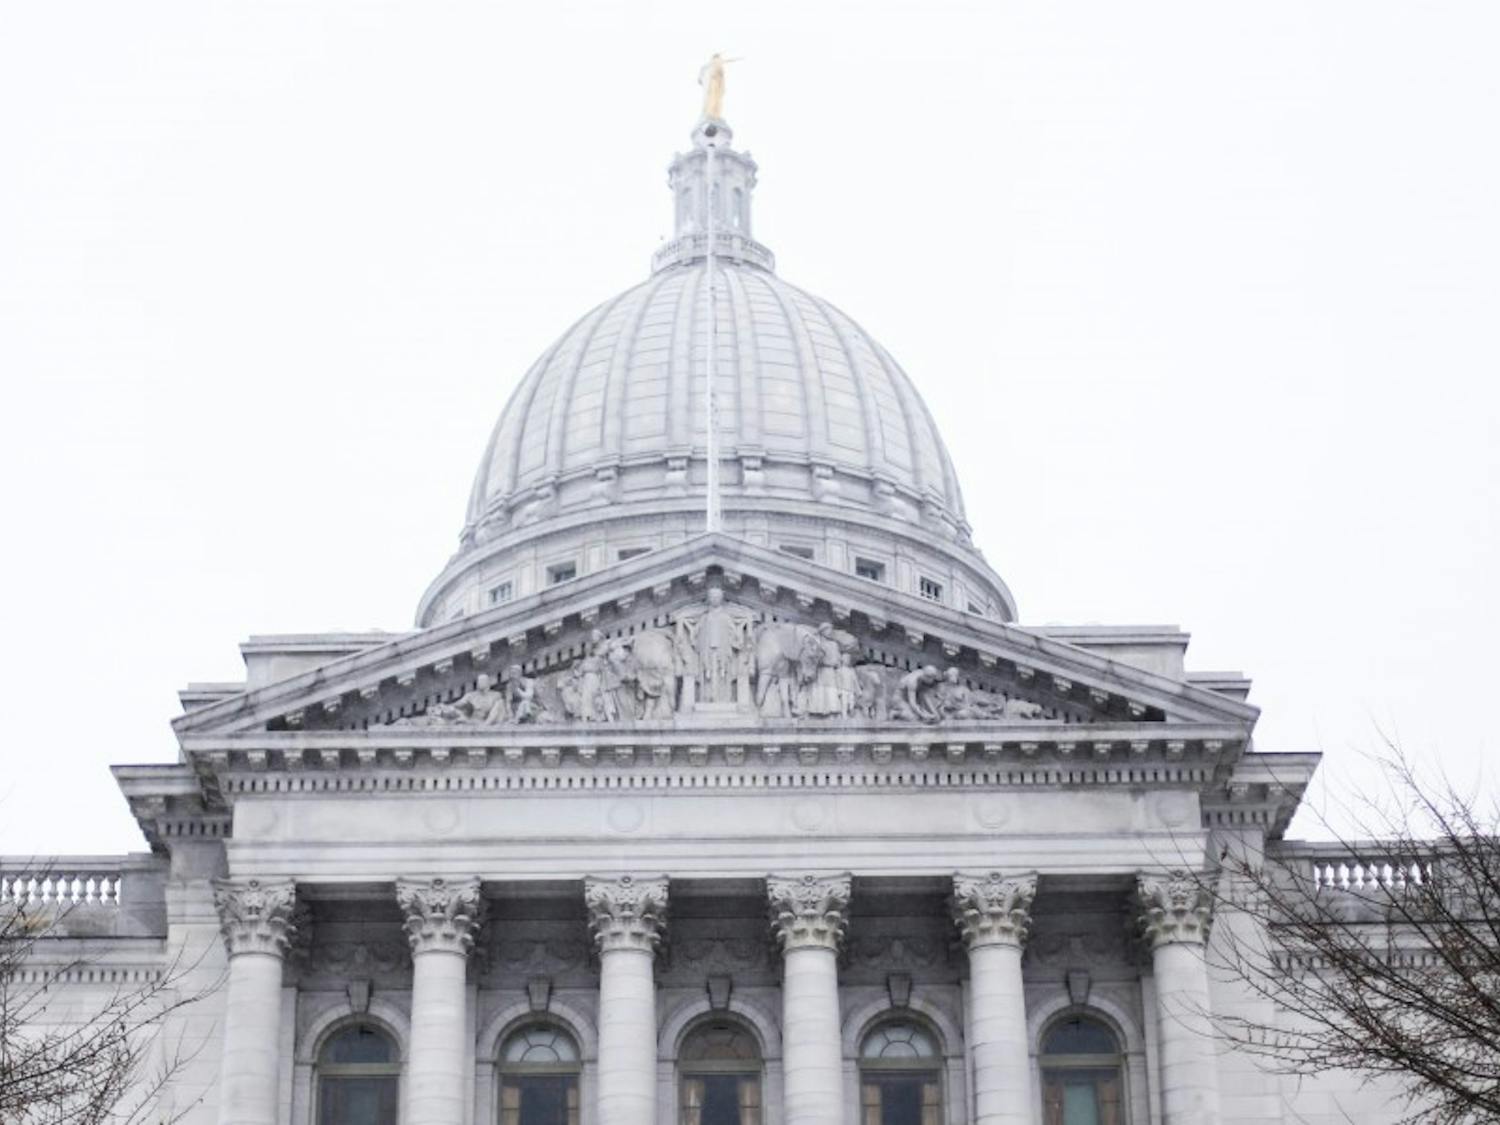 A bill that would give terminally ill patients more treatment options by utilizing experiential passed through the Assembly Health Committee with support on both sides of the aisle.